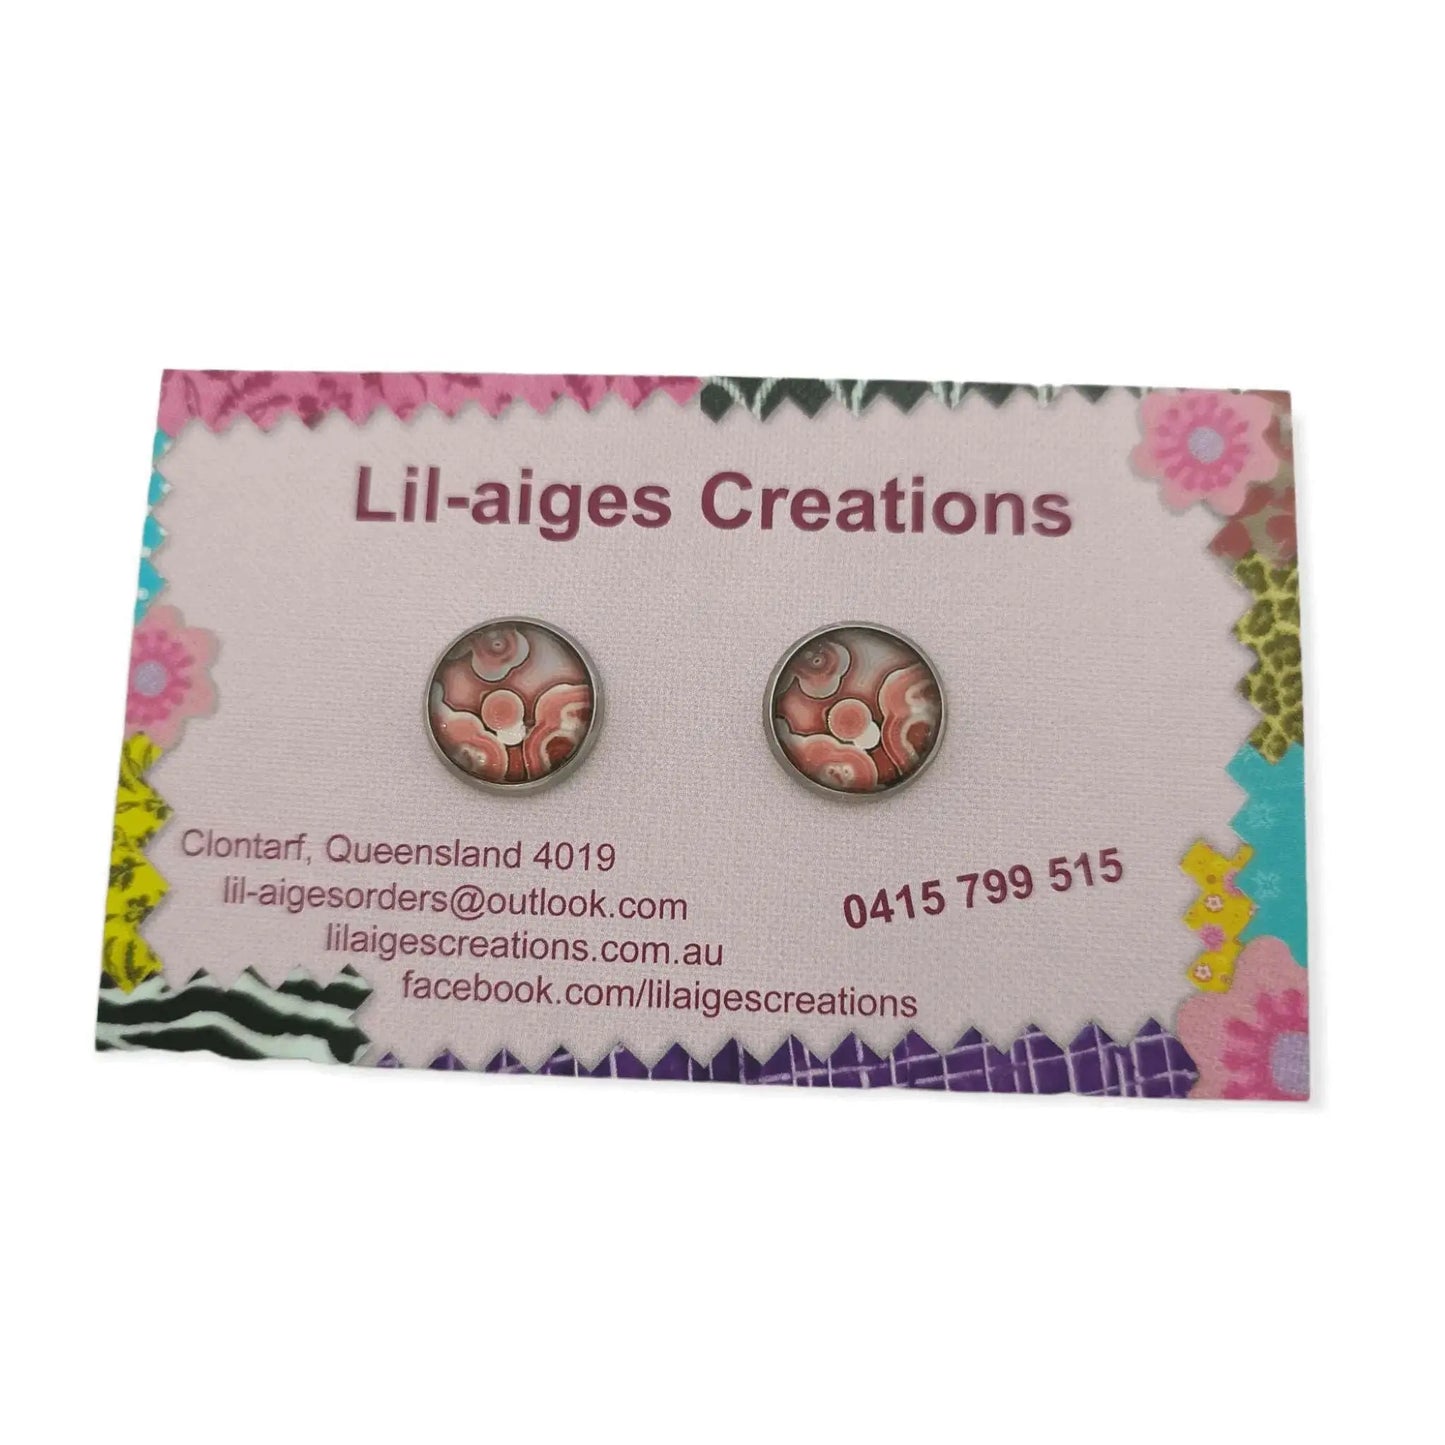 Geodes #1 themed stud earrings, Cabochon earrings, made in Australia - Lil-aiges Creations - Quality Australian-made Gifts